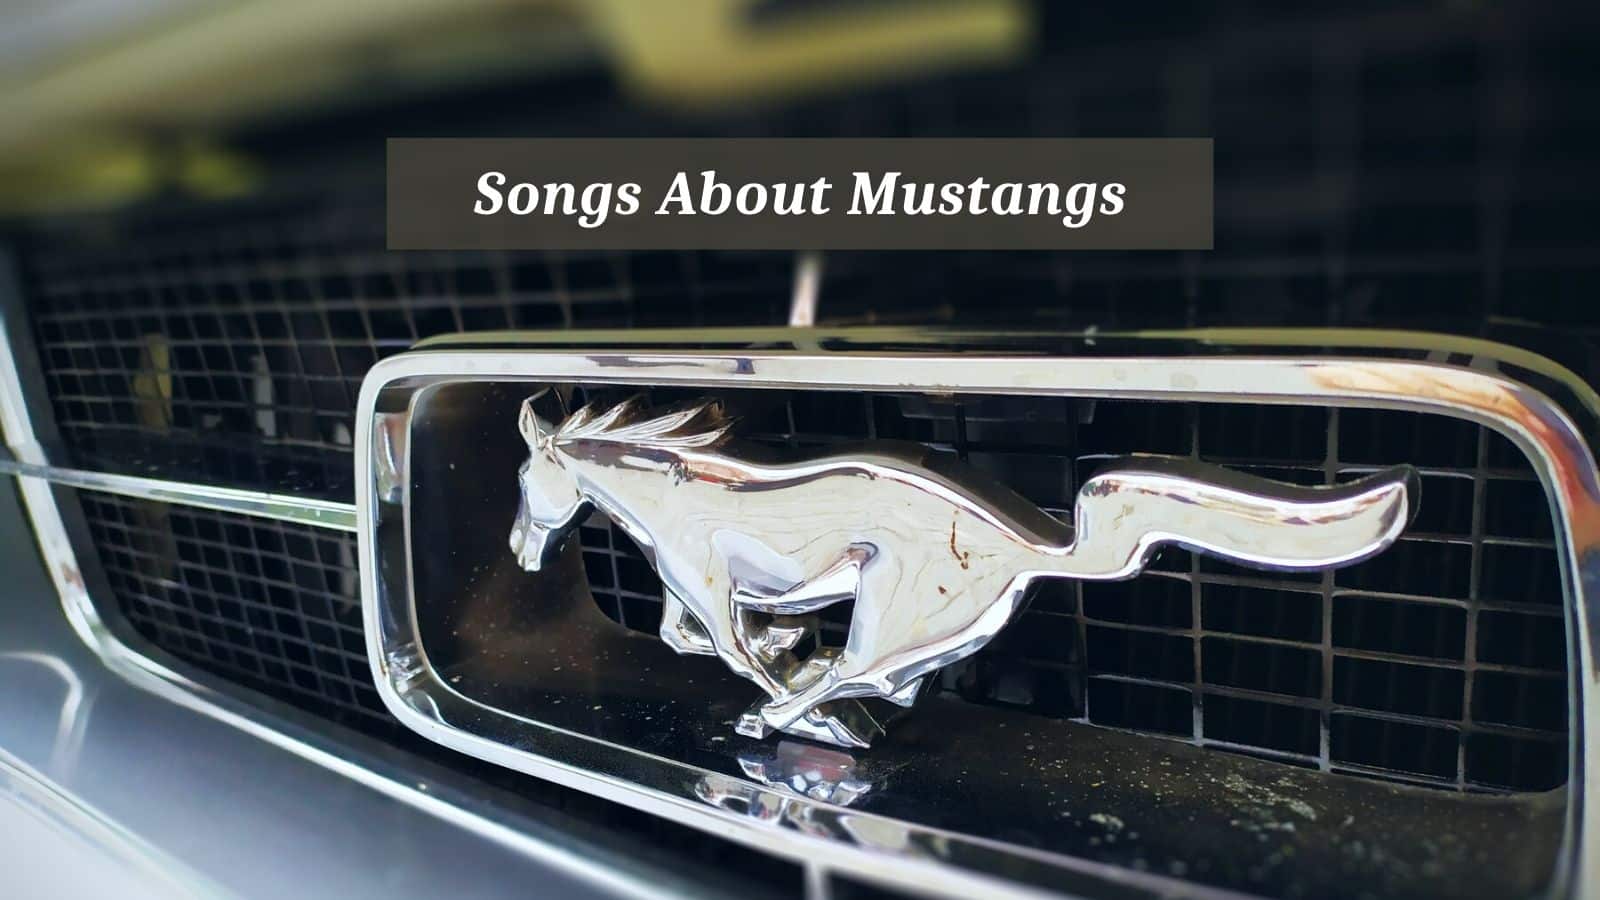 Songs About Mustangs